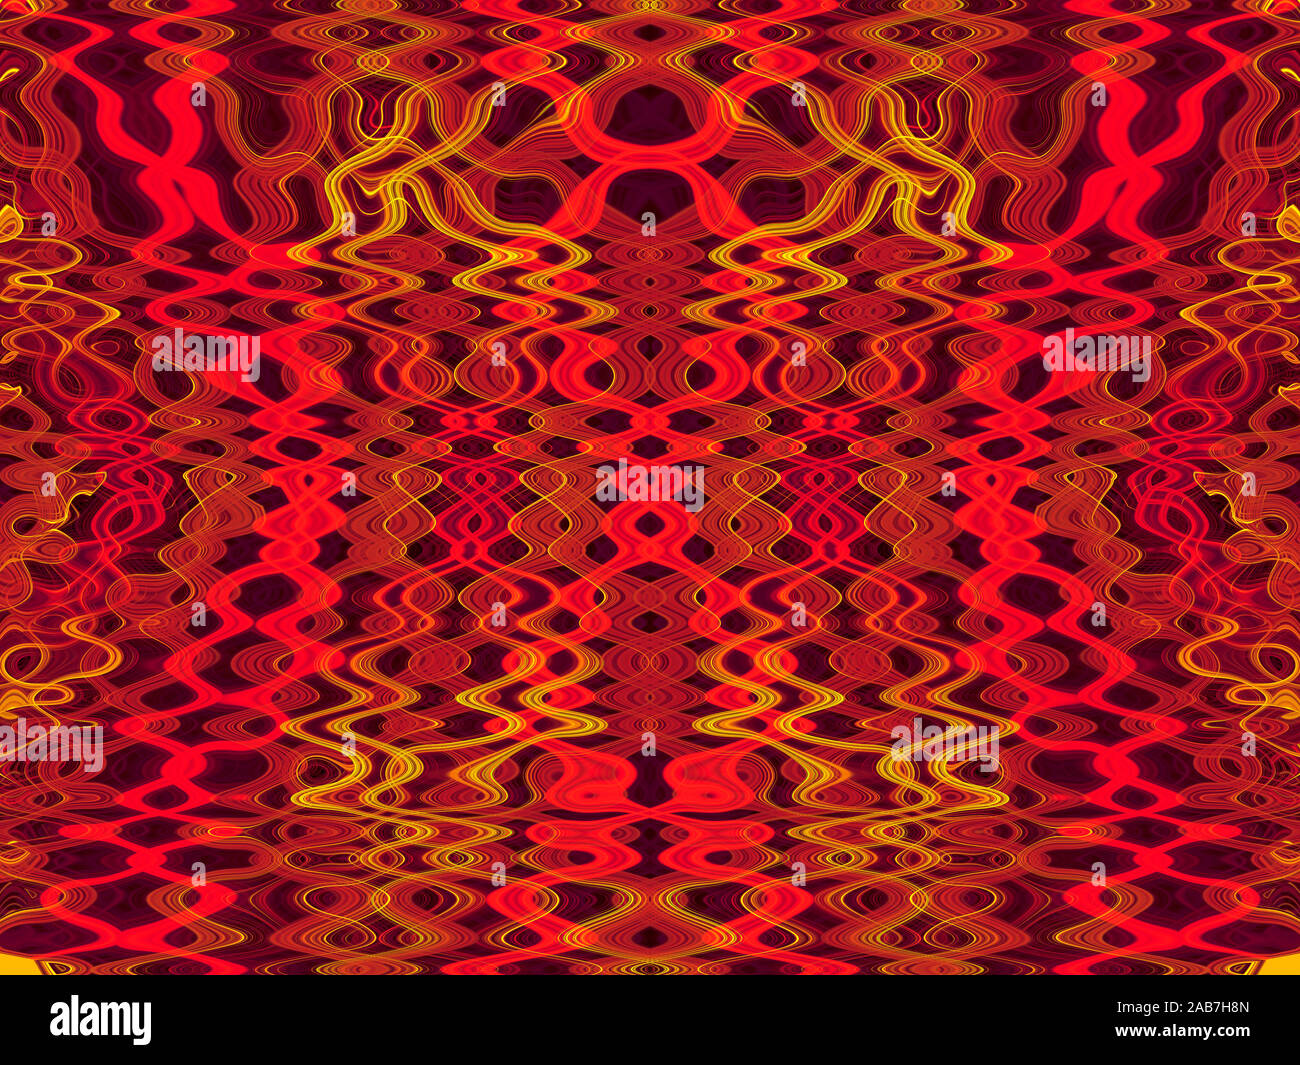 Red and yellow retro vintage psychedelic pattern background Stock Photo